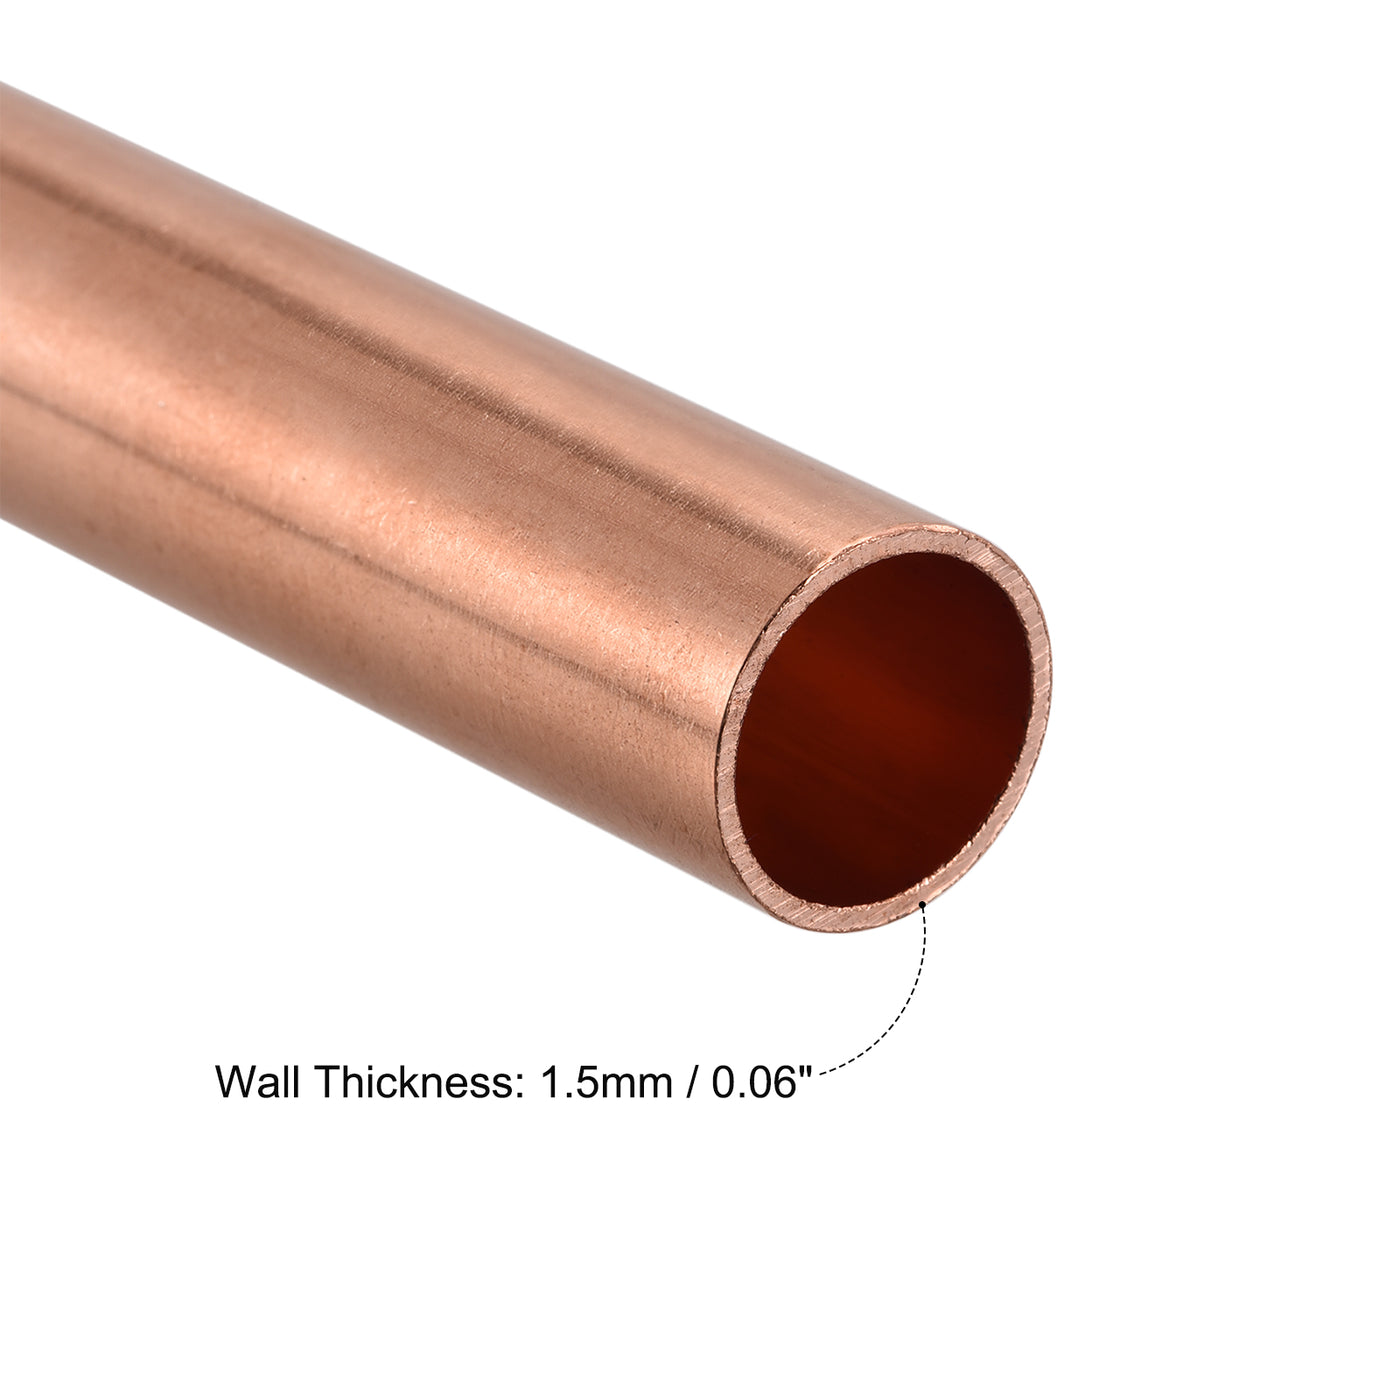 uxcell Uxcell Copper Round Tube 22mm OD 1.5mm Wall Thickness 100mm Length Pipe Tubing 2 Pcs